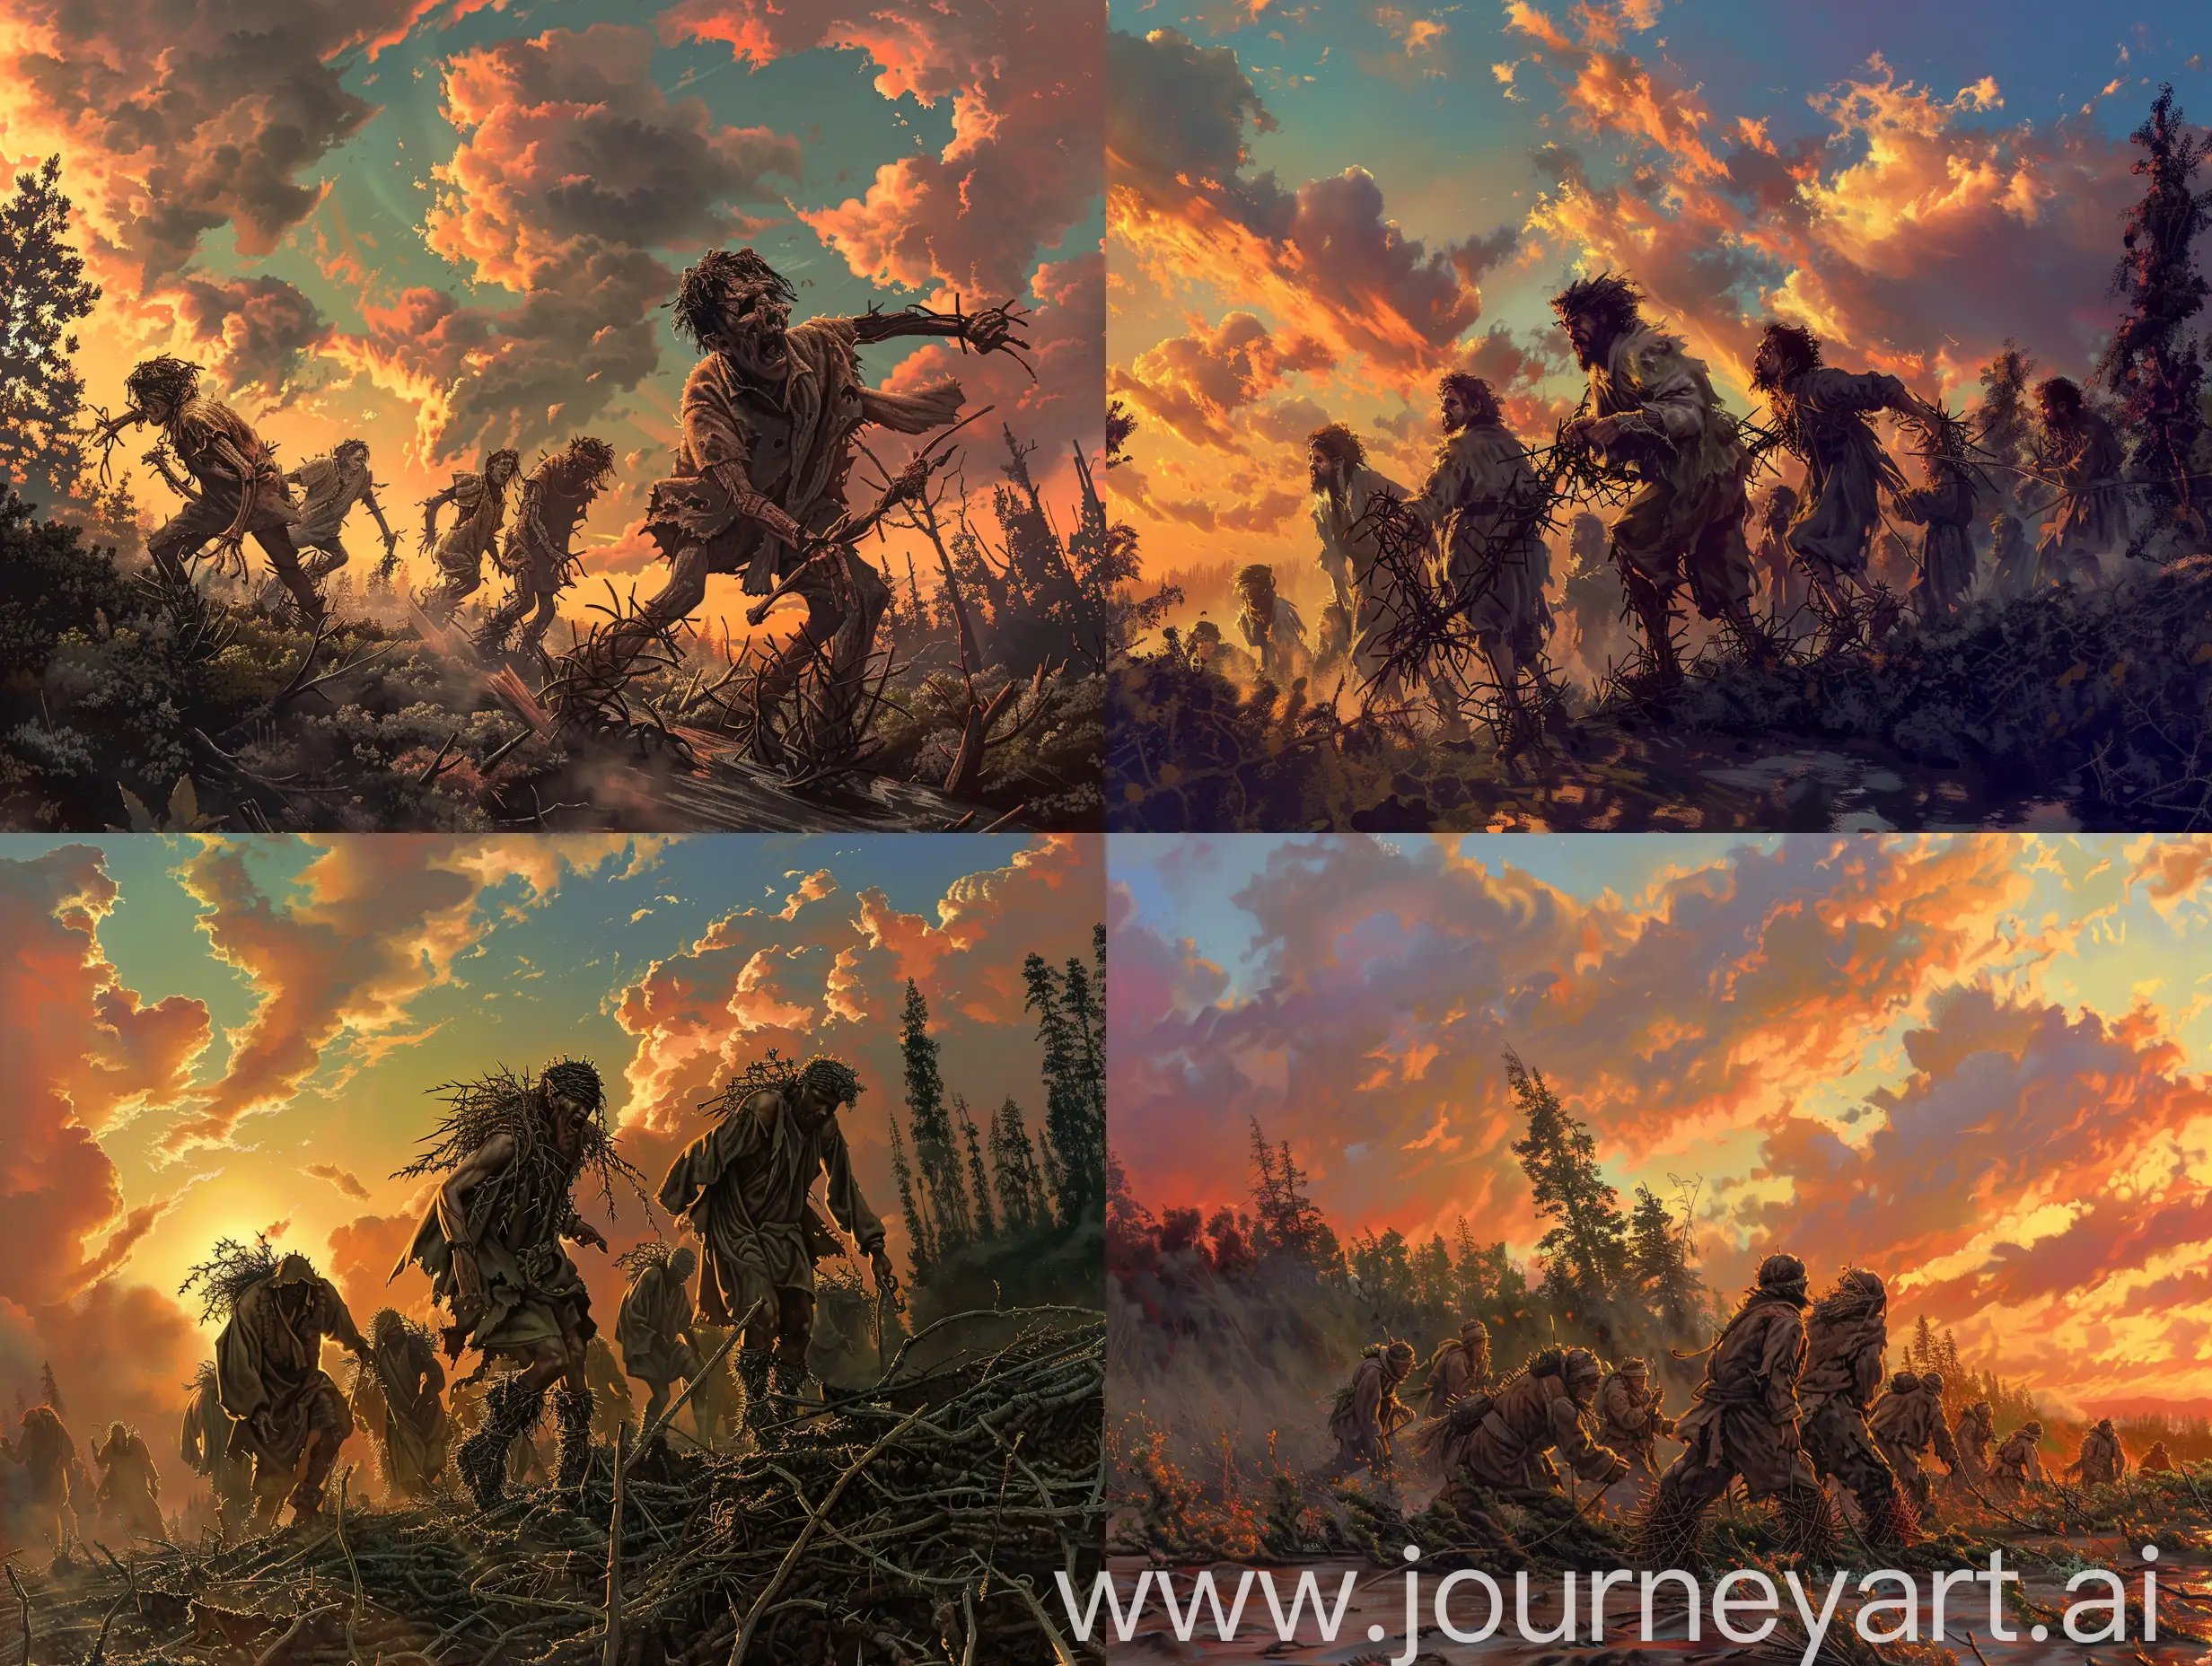 Courageous-Travelers-Navigate-Thorny-Wilderness-at-Sunset